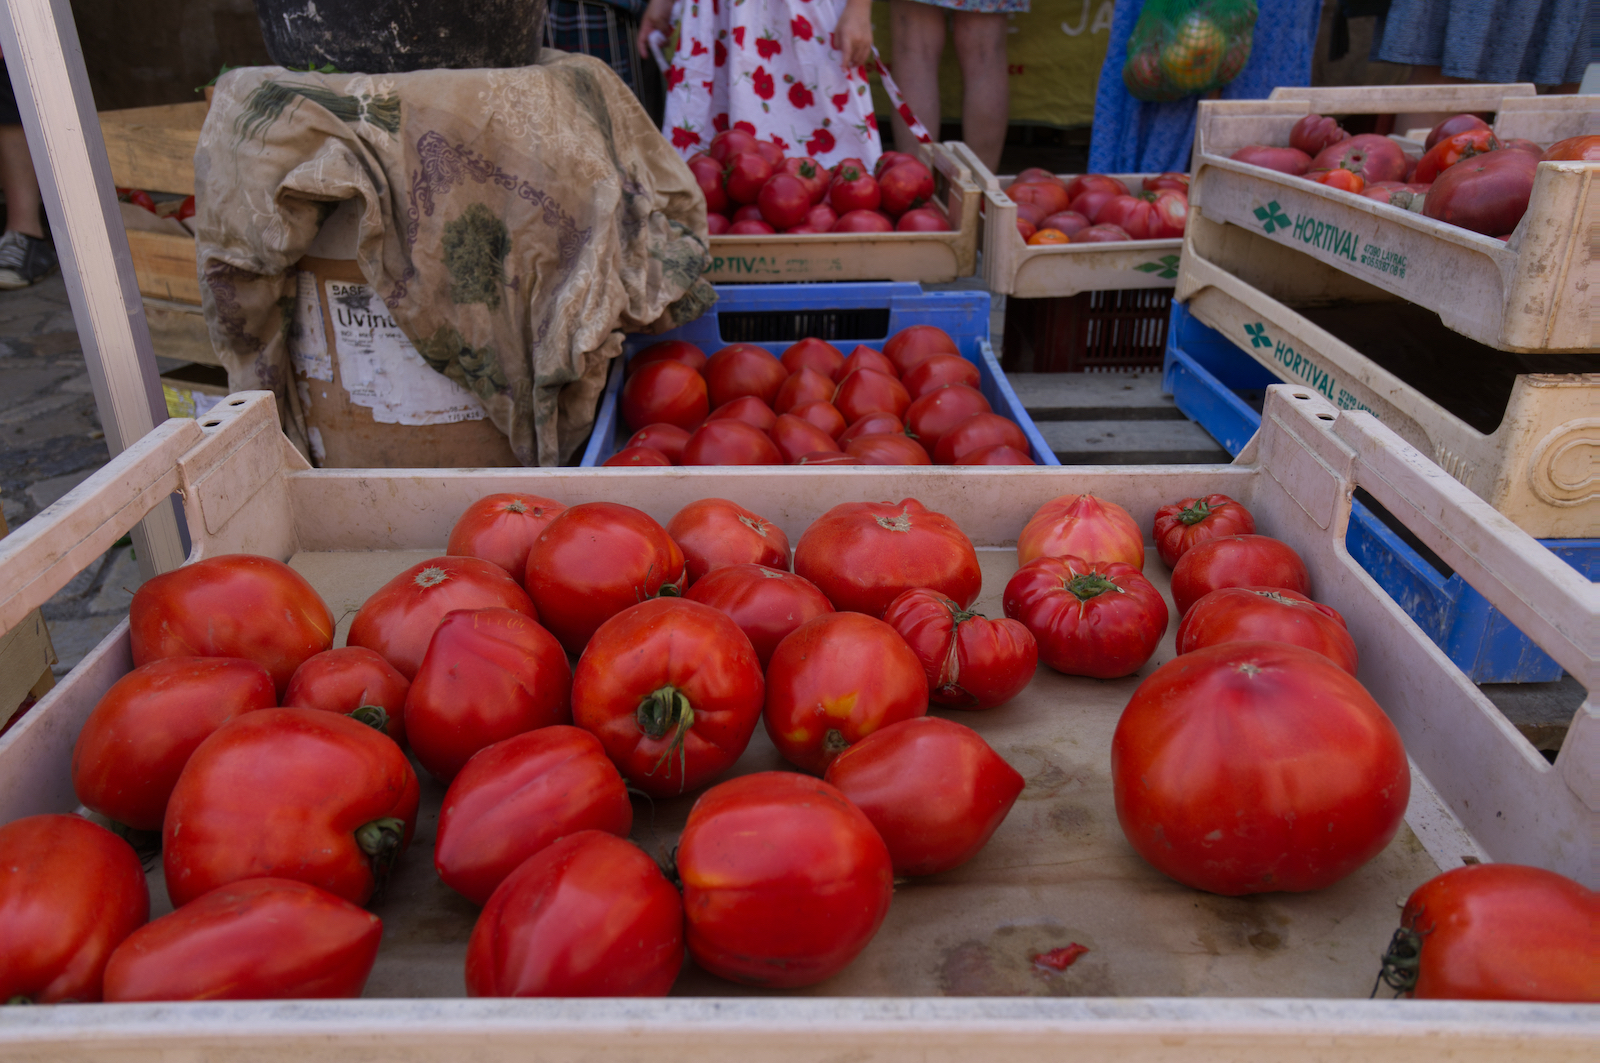 Sample image shot using the Sony Alpha A6700 of tomatoes at a French market